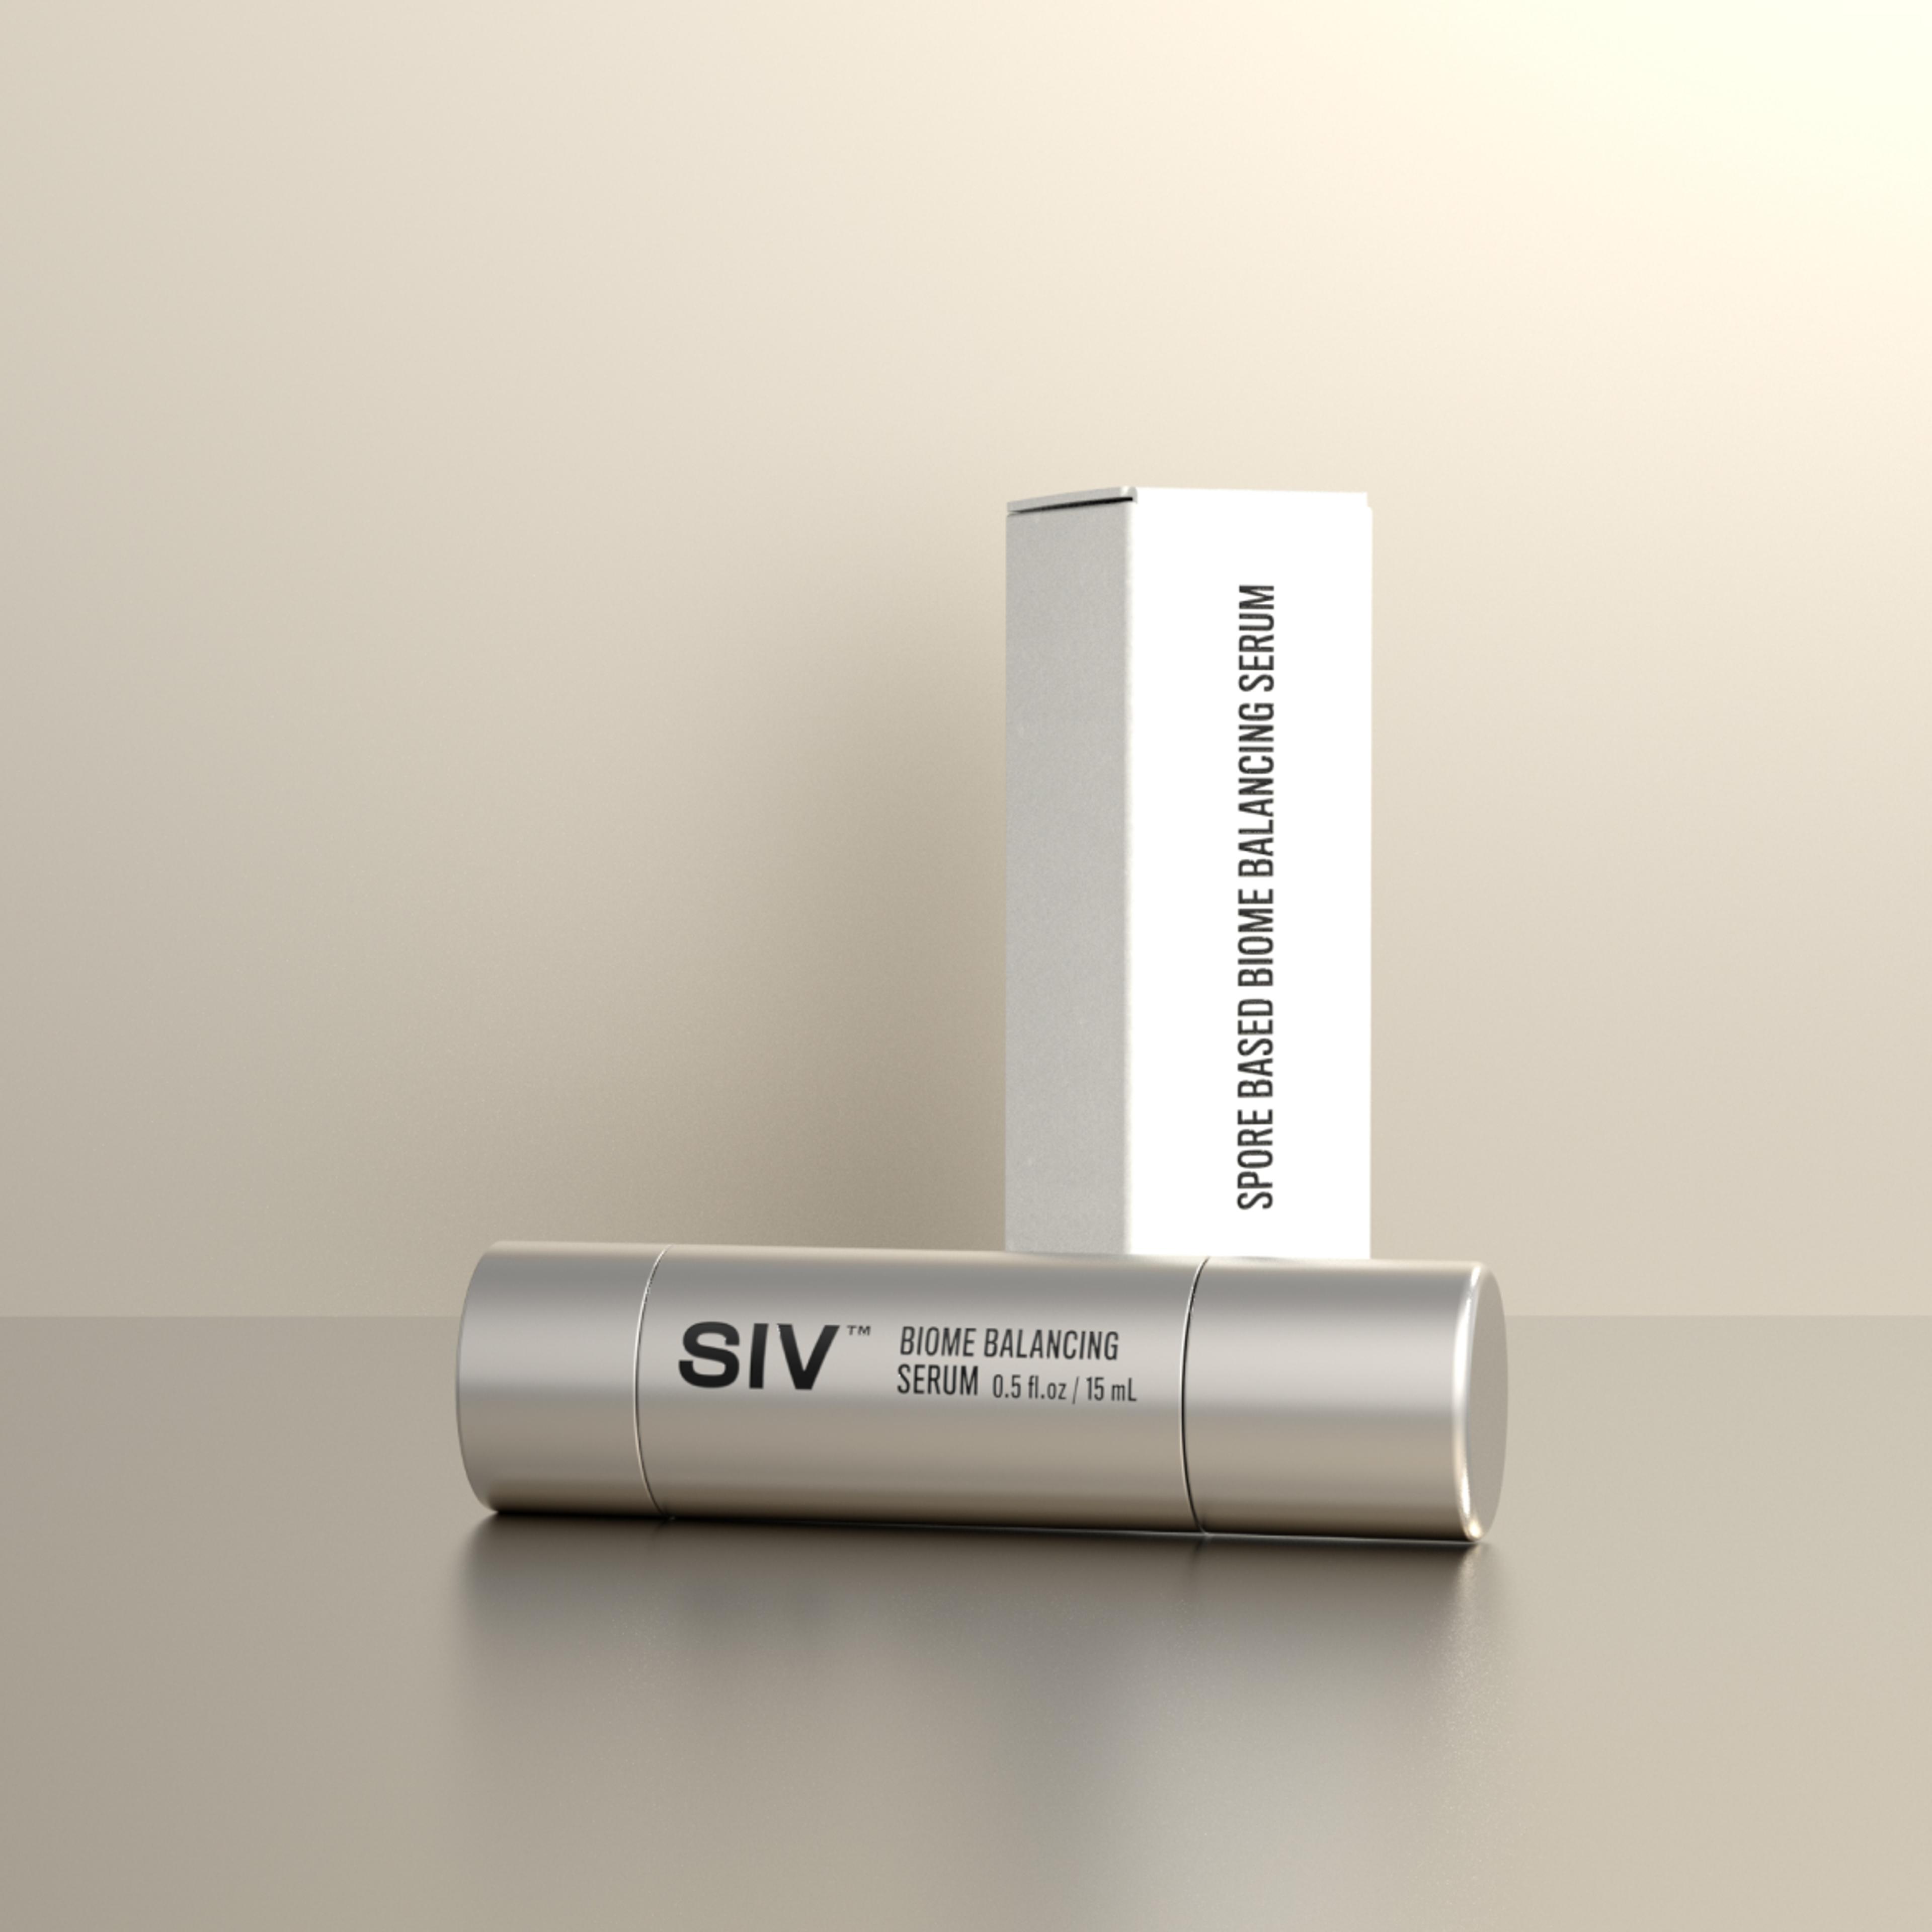 SIV product with box